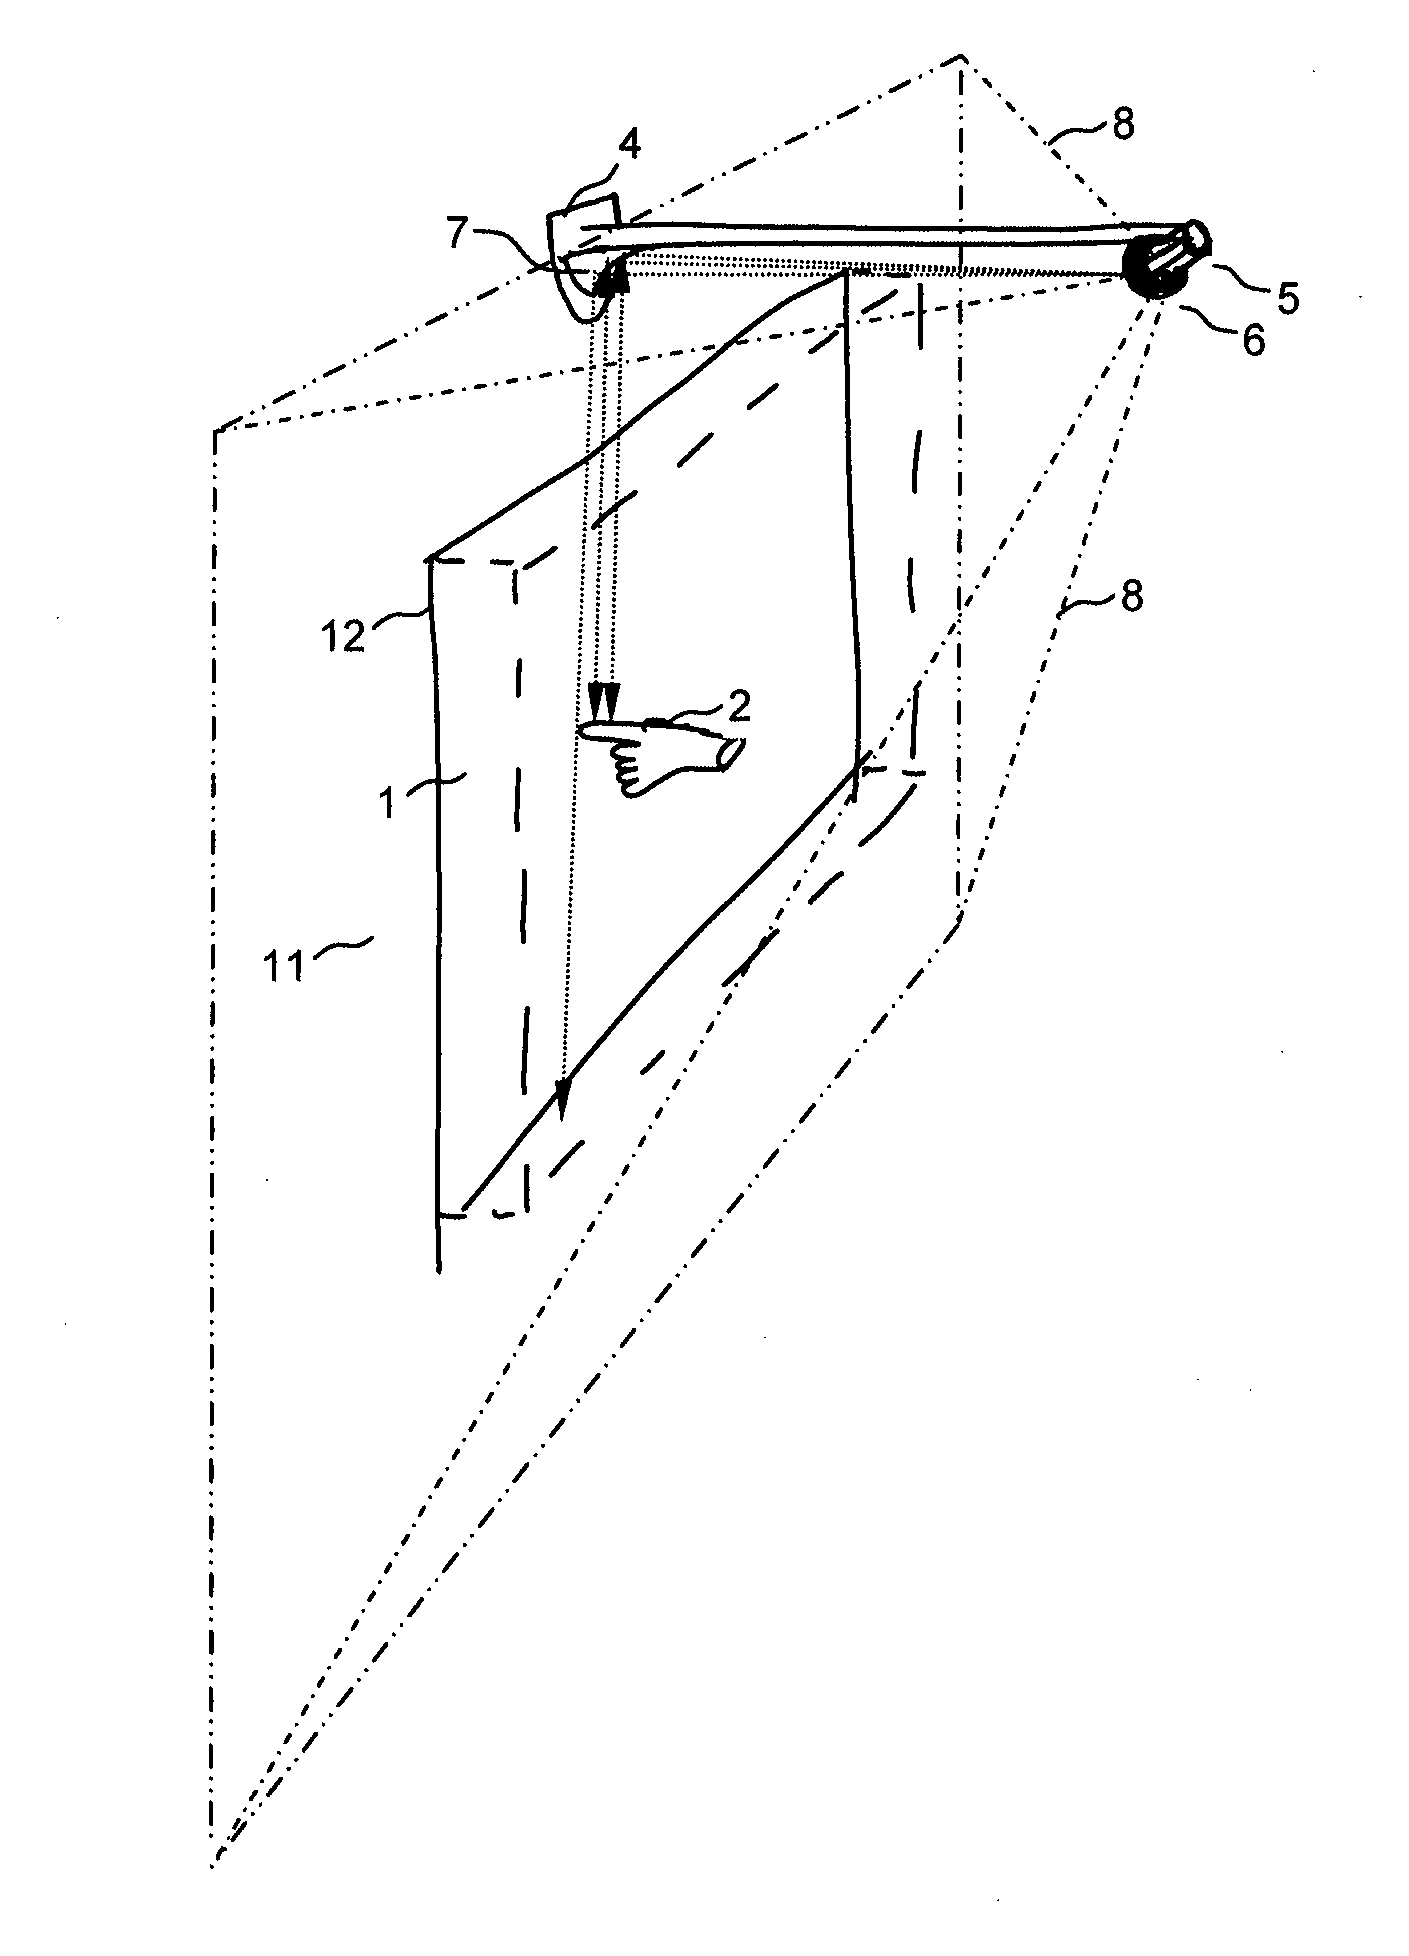 Camera-based multi-touch interaction apparatus, system and method